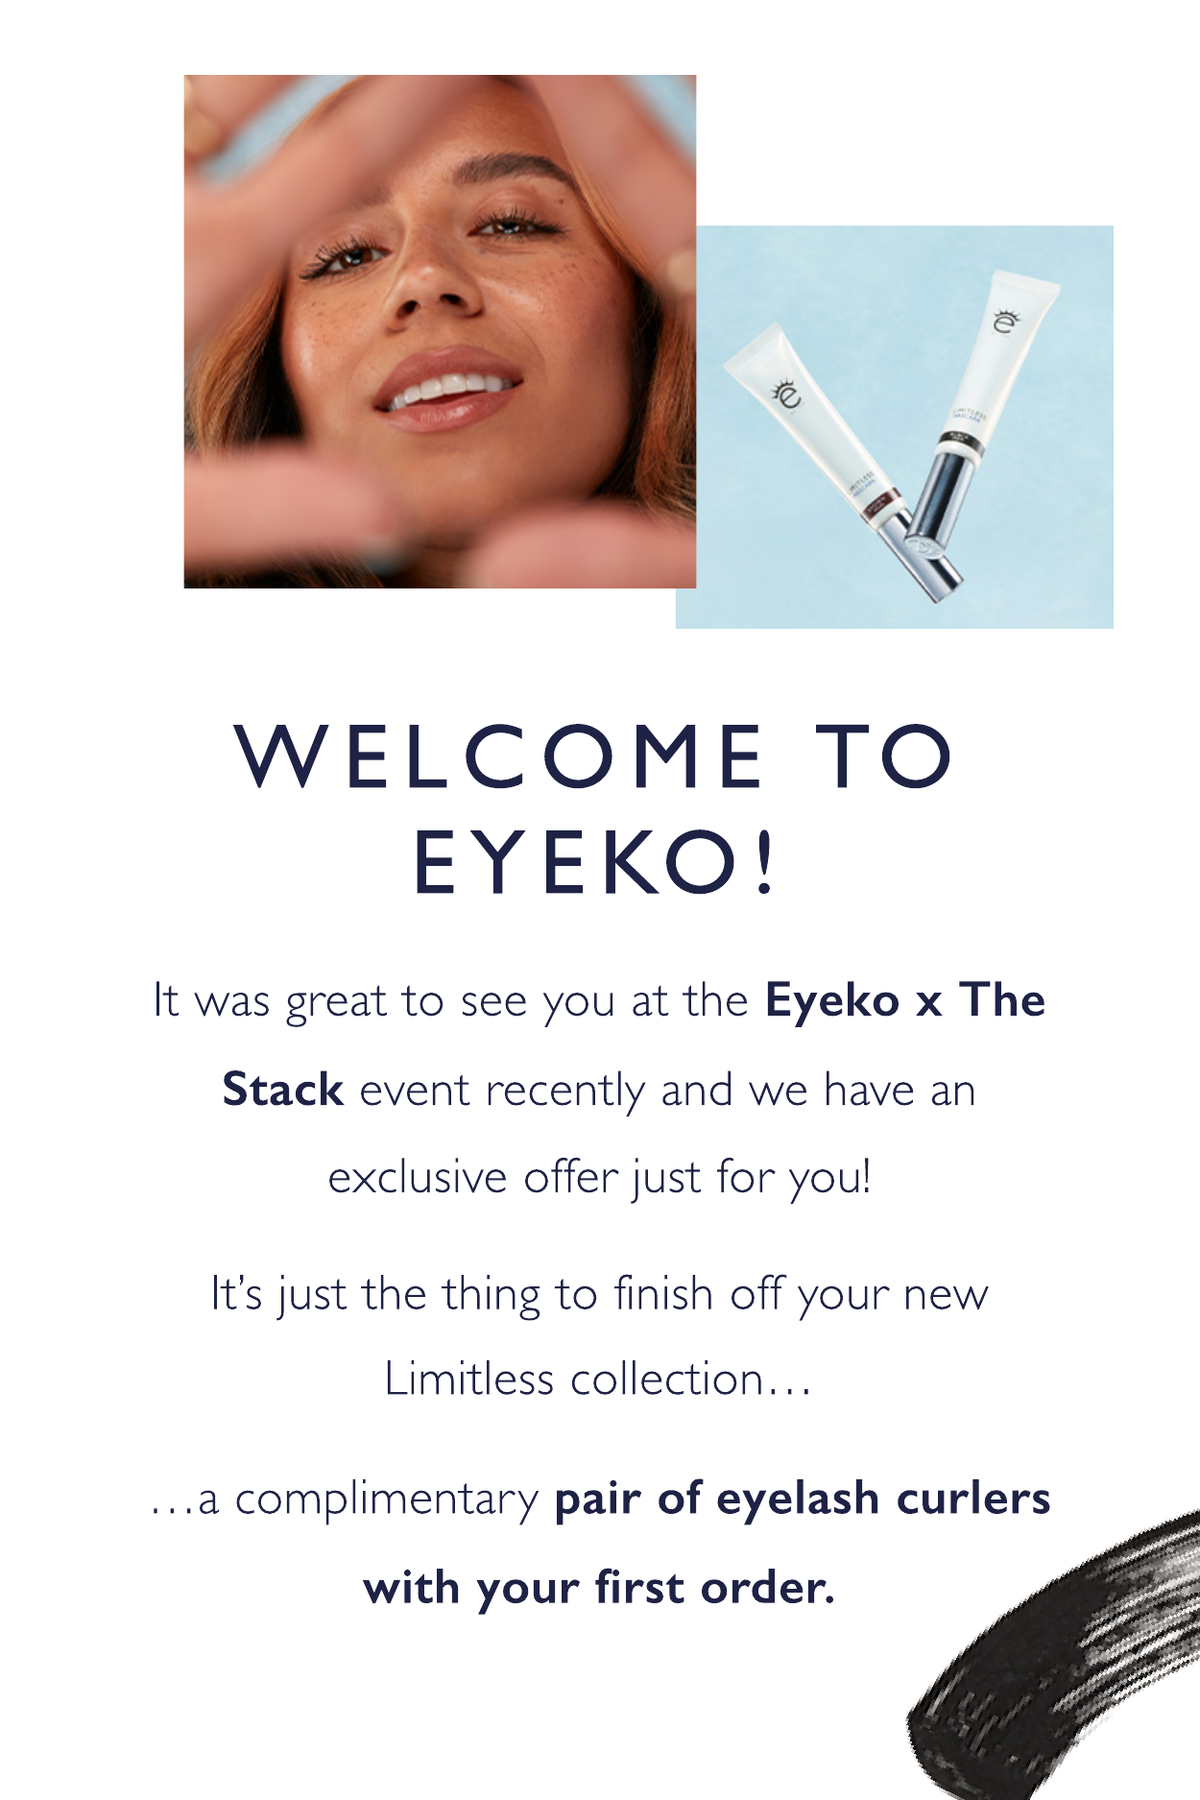 Welcome to Eyeko! It was great to see you at the Eyeko x The Stack event recently and we have an exclusive offer just for you! It’s just the thing to finish off your new Limitless collection.. a complimentary pair of eyelash curlers with your first order.